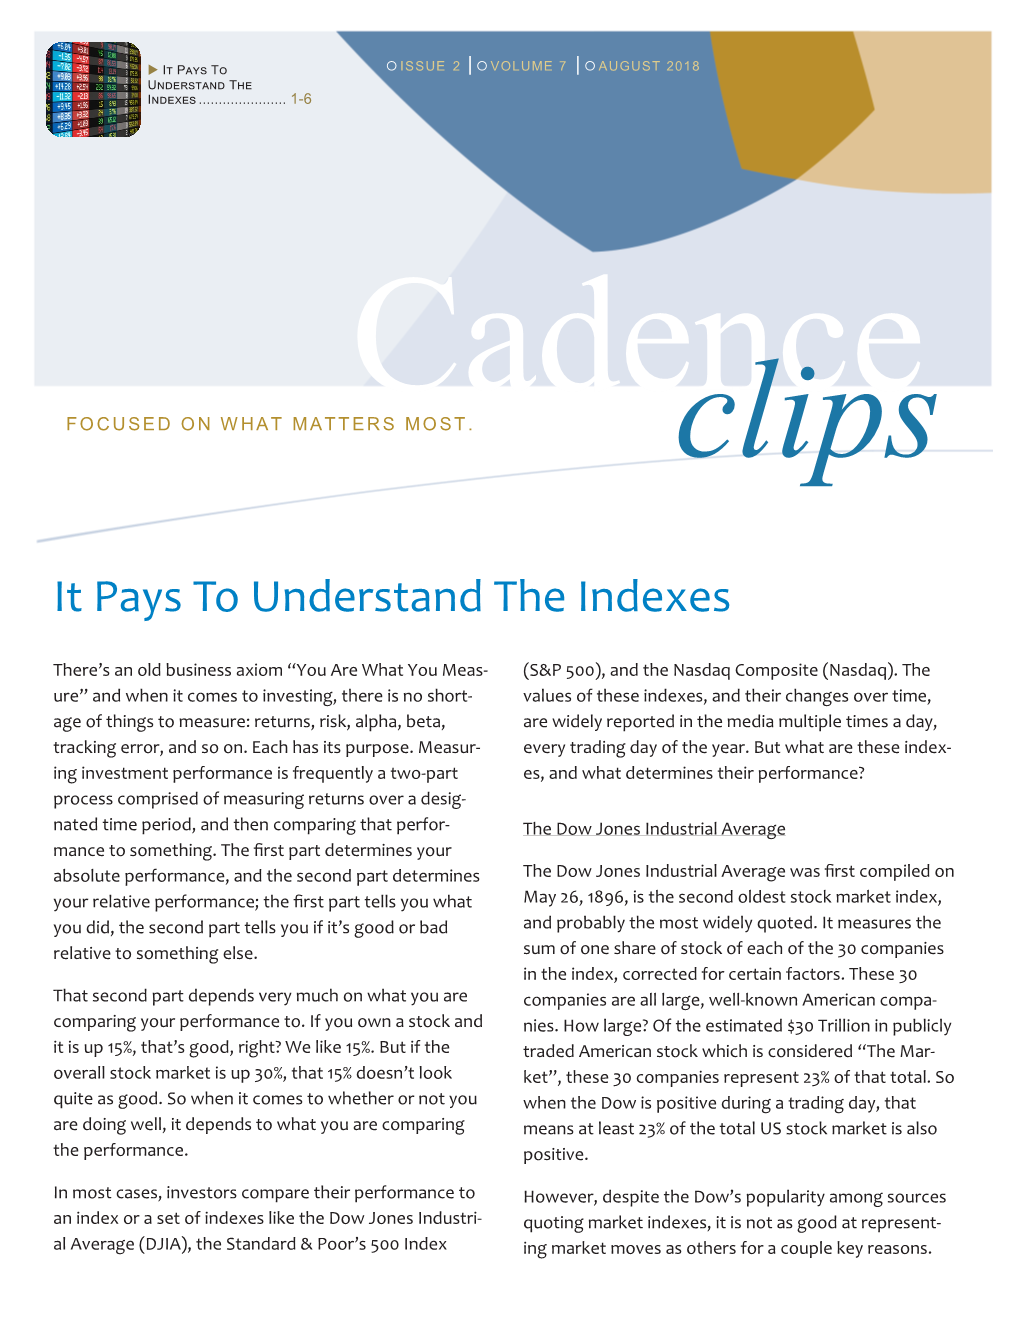 Cadence Clips – August 2018: It Pays to Understand the Indexes